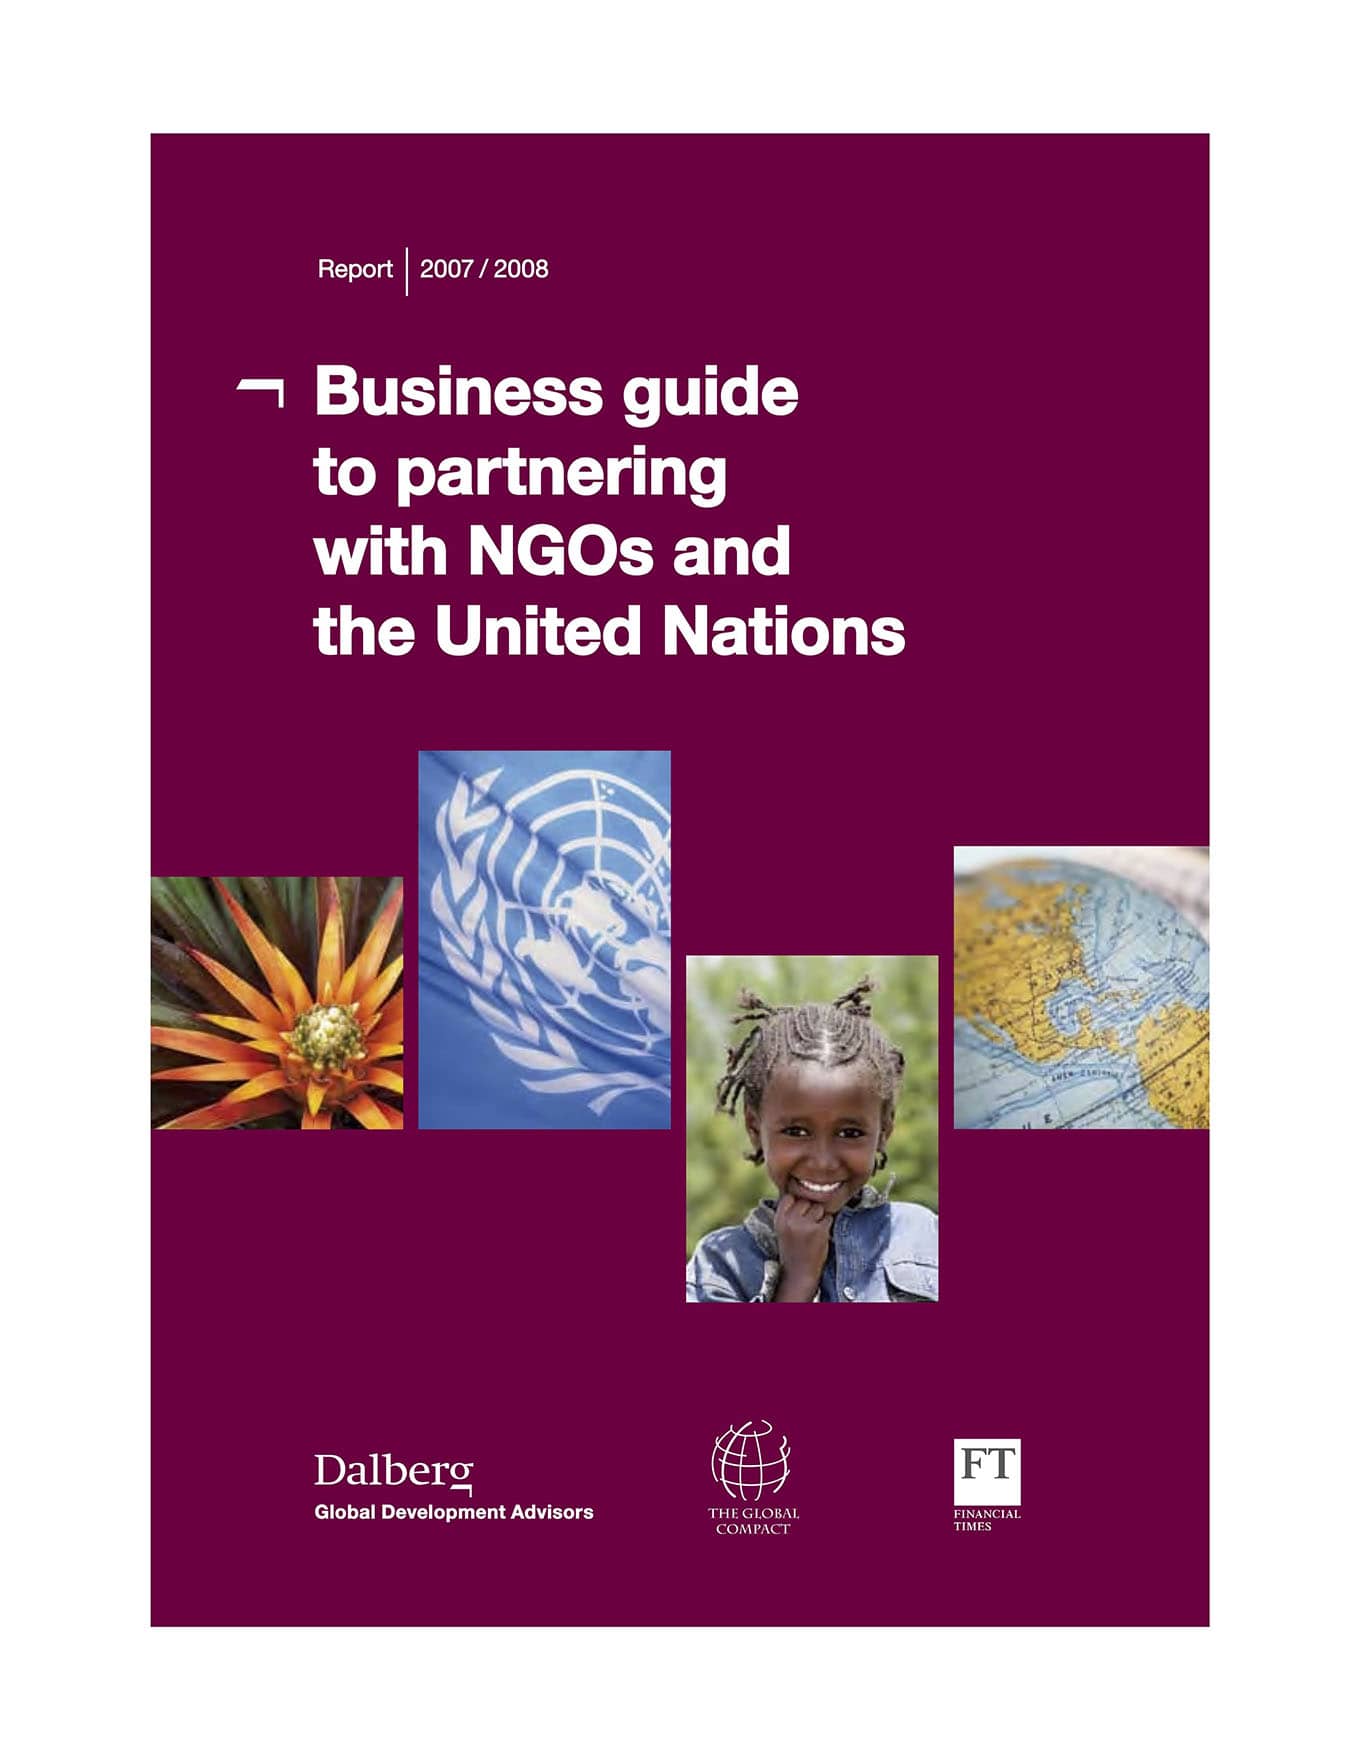 Business Guide to Partnering with NGOs and the United Nations (2007/2008)